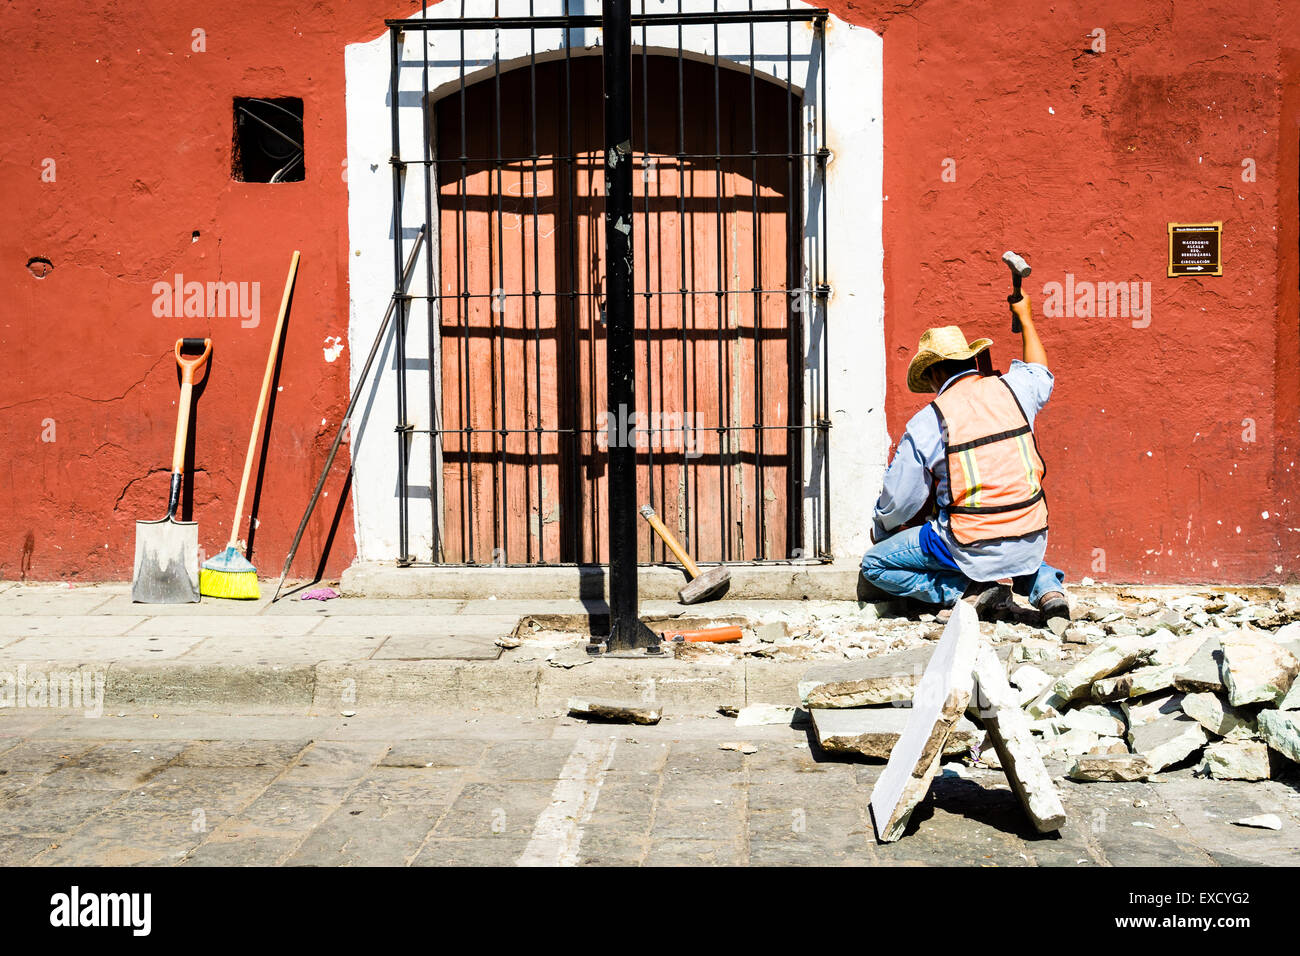 Construction worker swinging a hammer to tear up and repair stone sidewalk in the hot afternoon sun Stock Photo